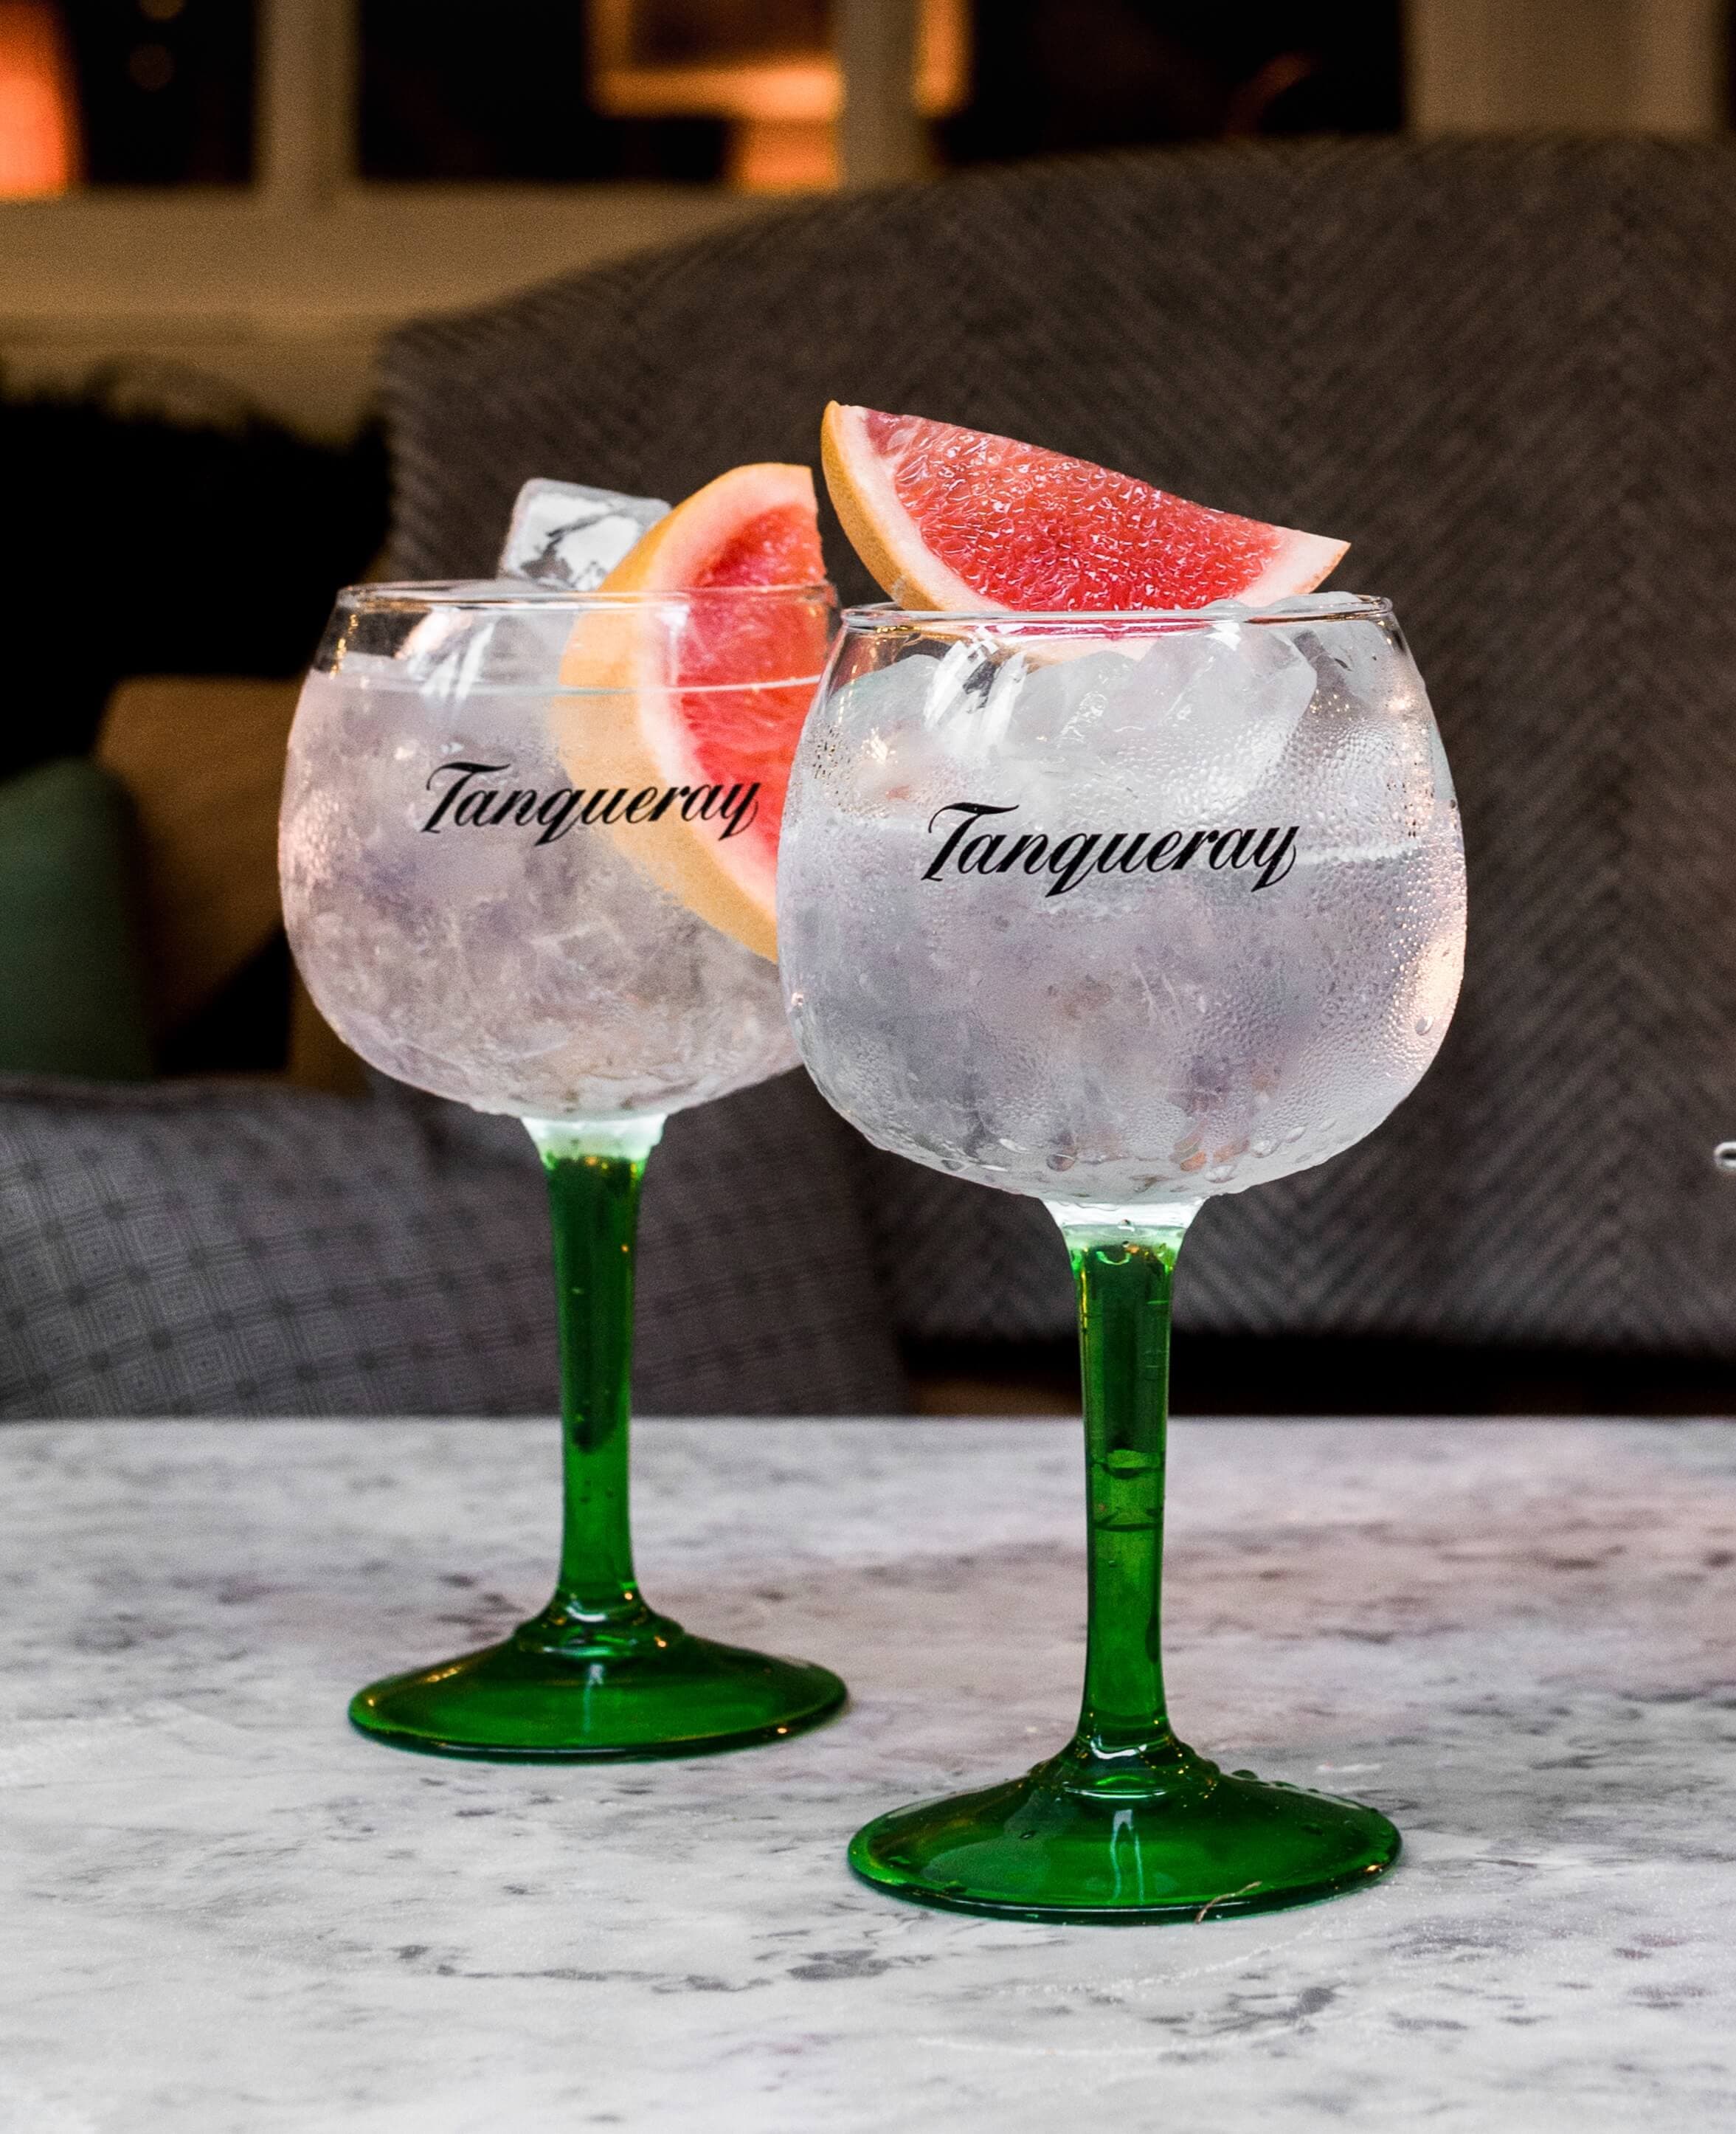 Two Gin & Tonic cocktails made with Tanqueray No. Ten, garnished with grapefruit slices. Both cocktails are in Tanqueray branded glasses.